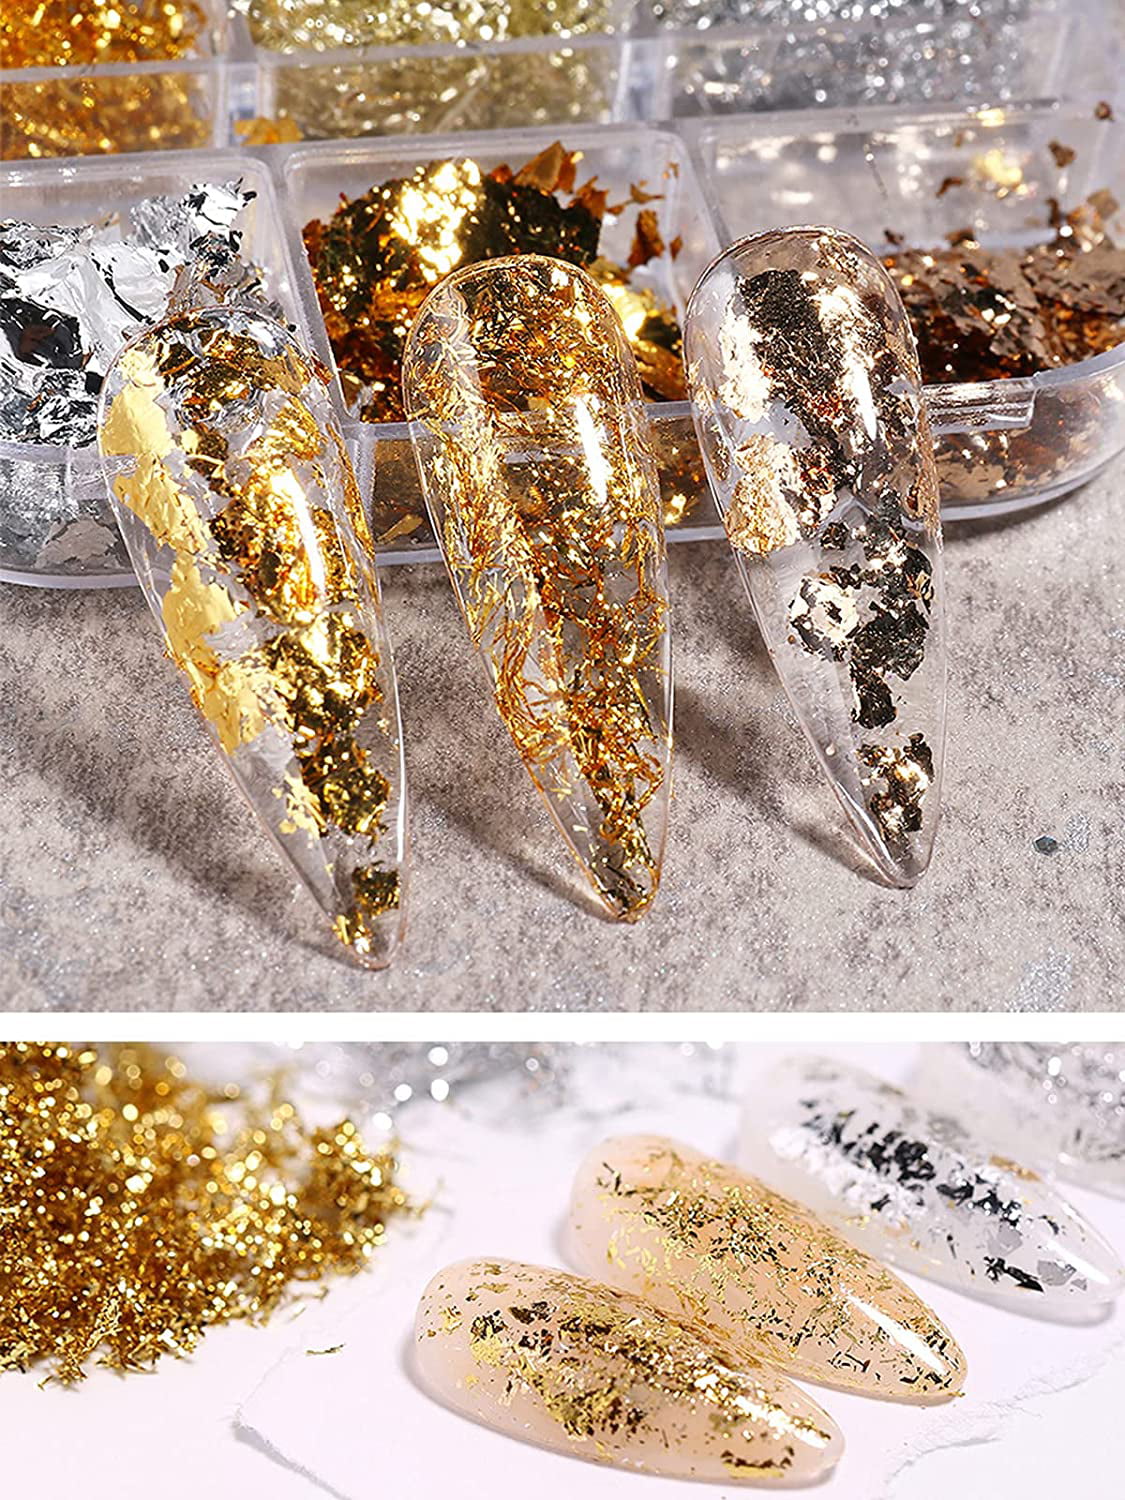 TIESOME Nail Foil 3D Sparking Gold Flakes for Nails 6 Grids